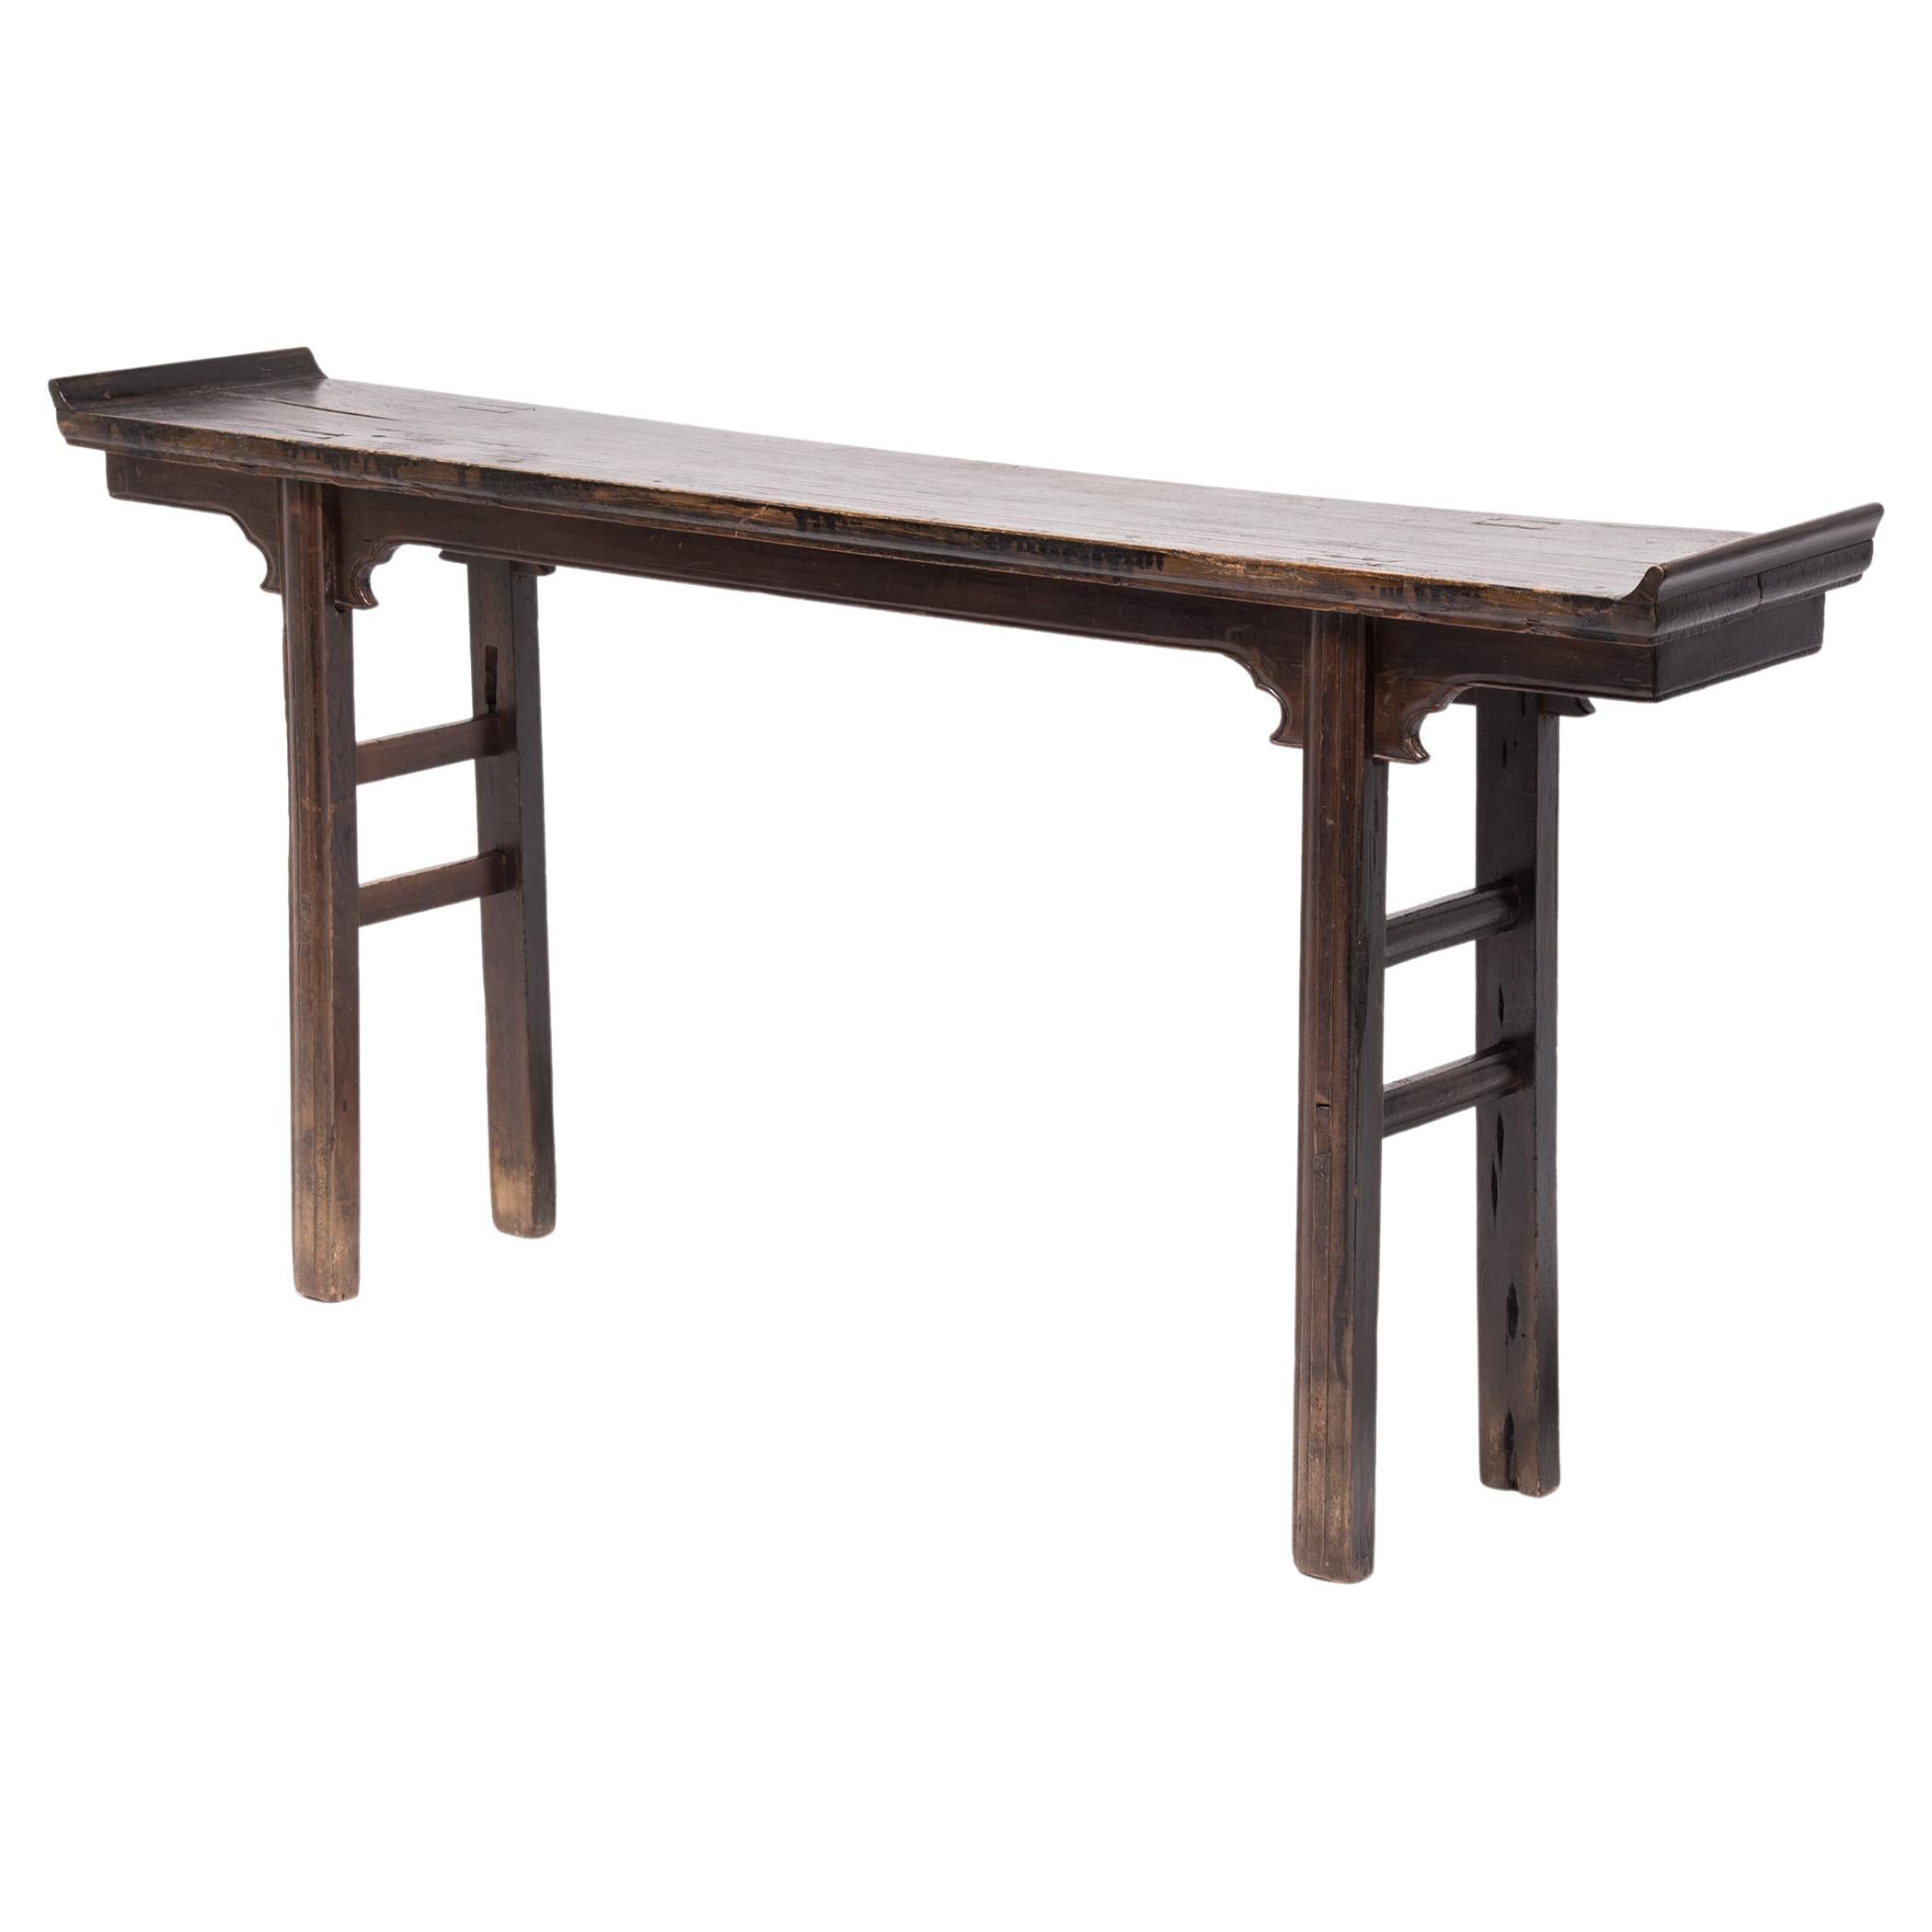 Shallow Chinese Altar Table with Everted Ends, C. 1850